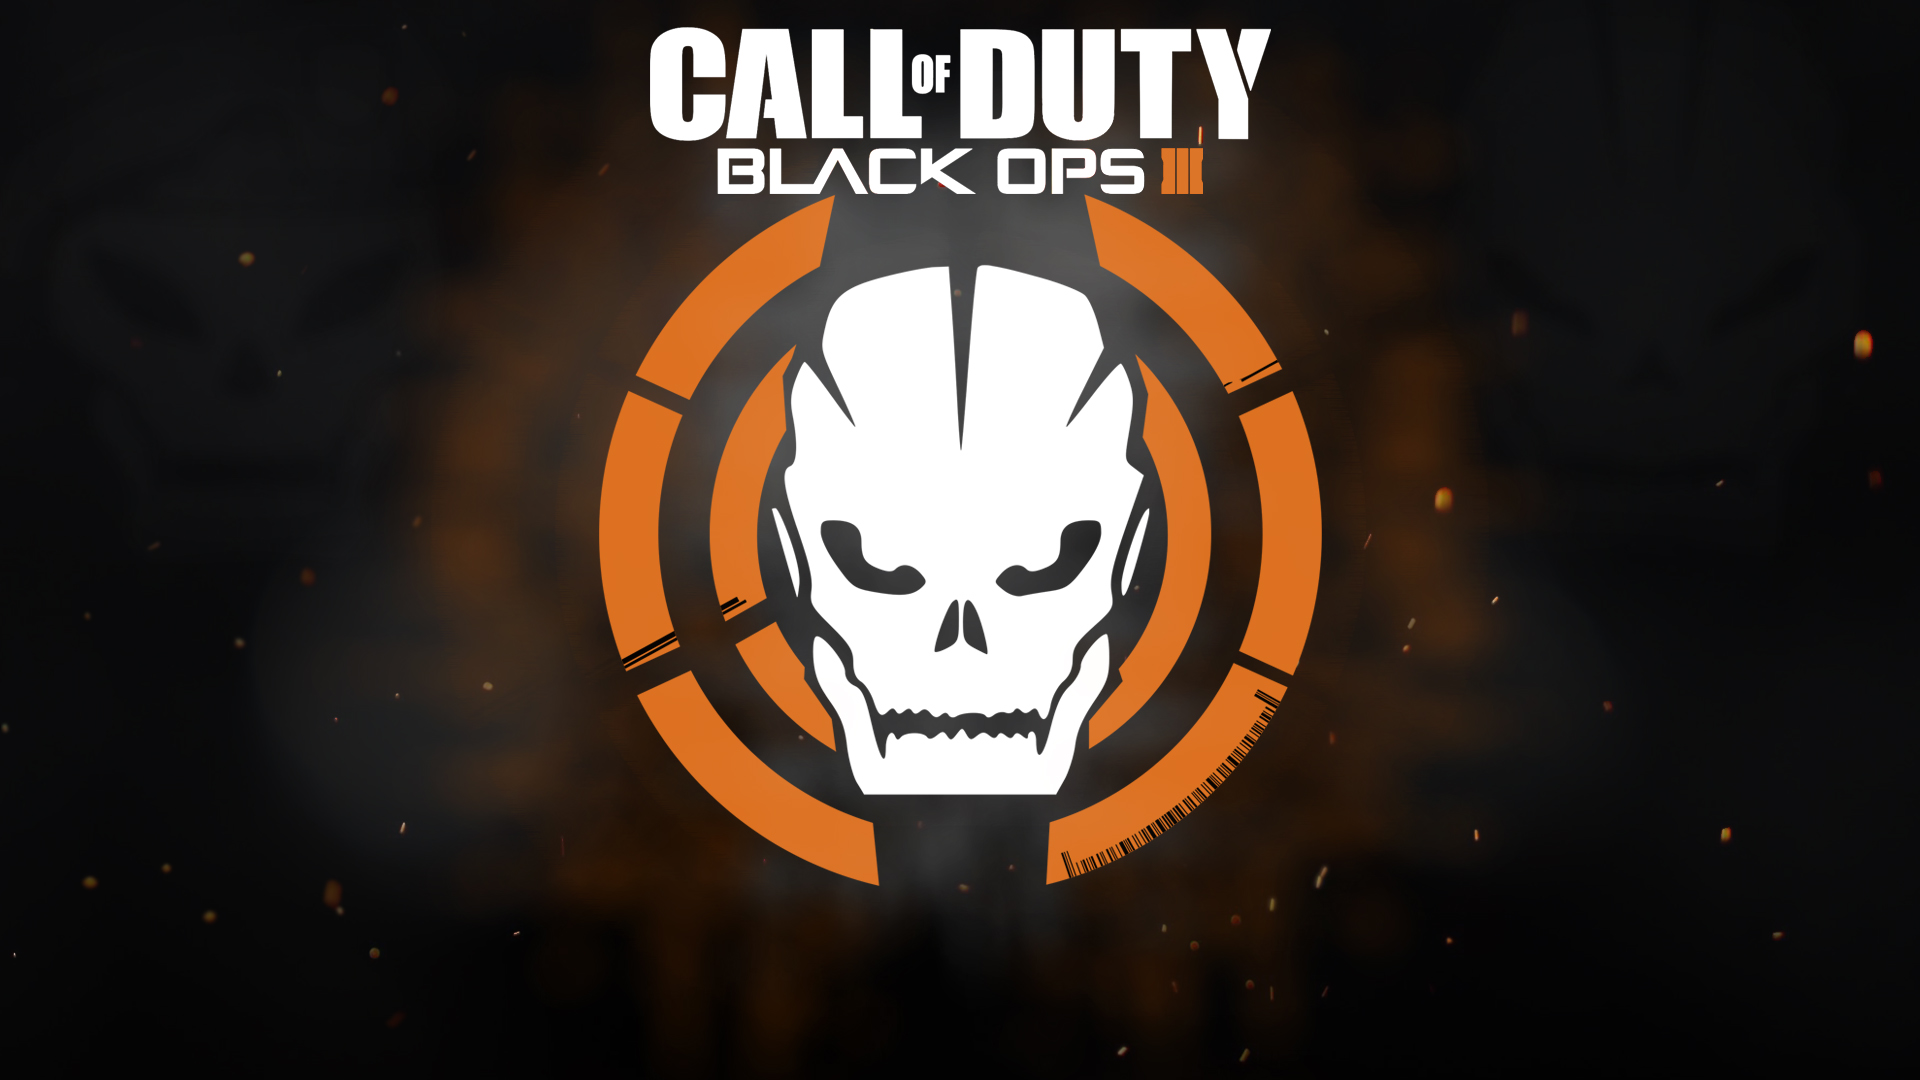 Call of Duty Black Ops 3 Wallpaper 02 by Toby Affenbude toby